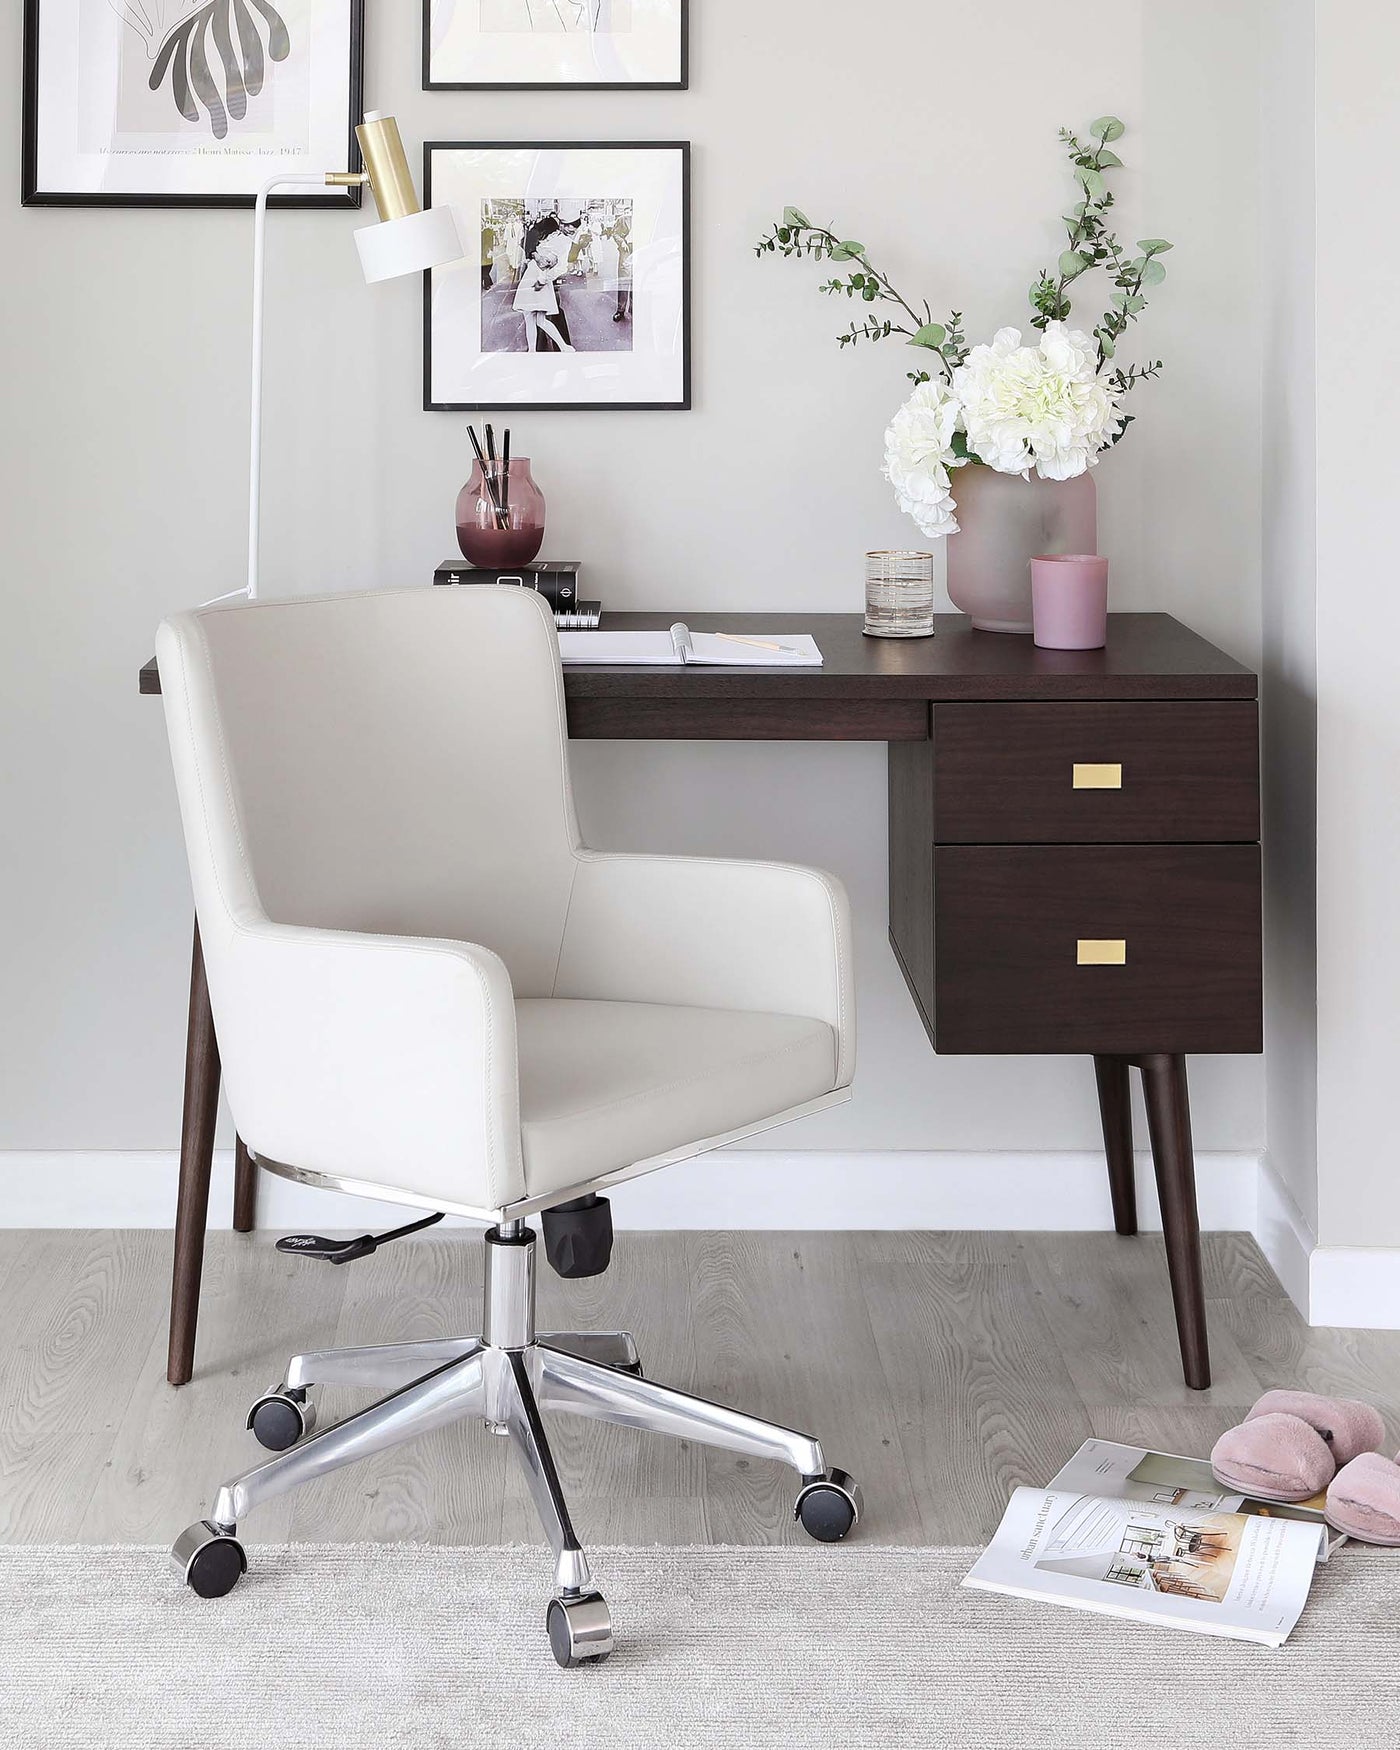 Modern minimalist home office setup featuring a sleek dark wood desk with a slim drawer and angled legs, paired with an elegant white leather office chair with a high back and chrome swivel base. The desk is accessorized with a brass desk lamp, framed artwork above, and a vase with white flowers for a touch of organic warmth. A light-coloured rug under the chair softens the look of the light wood flooring.